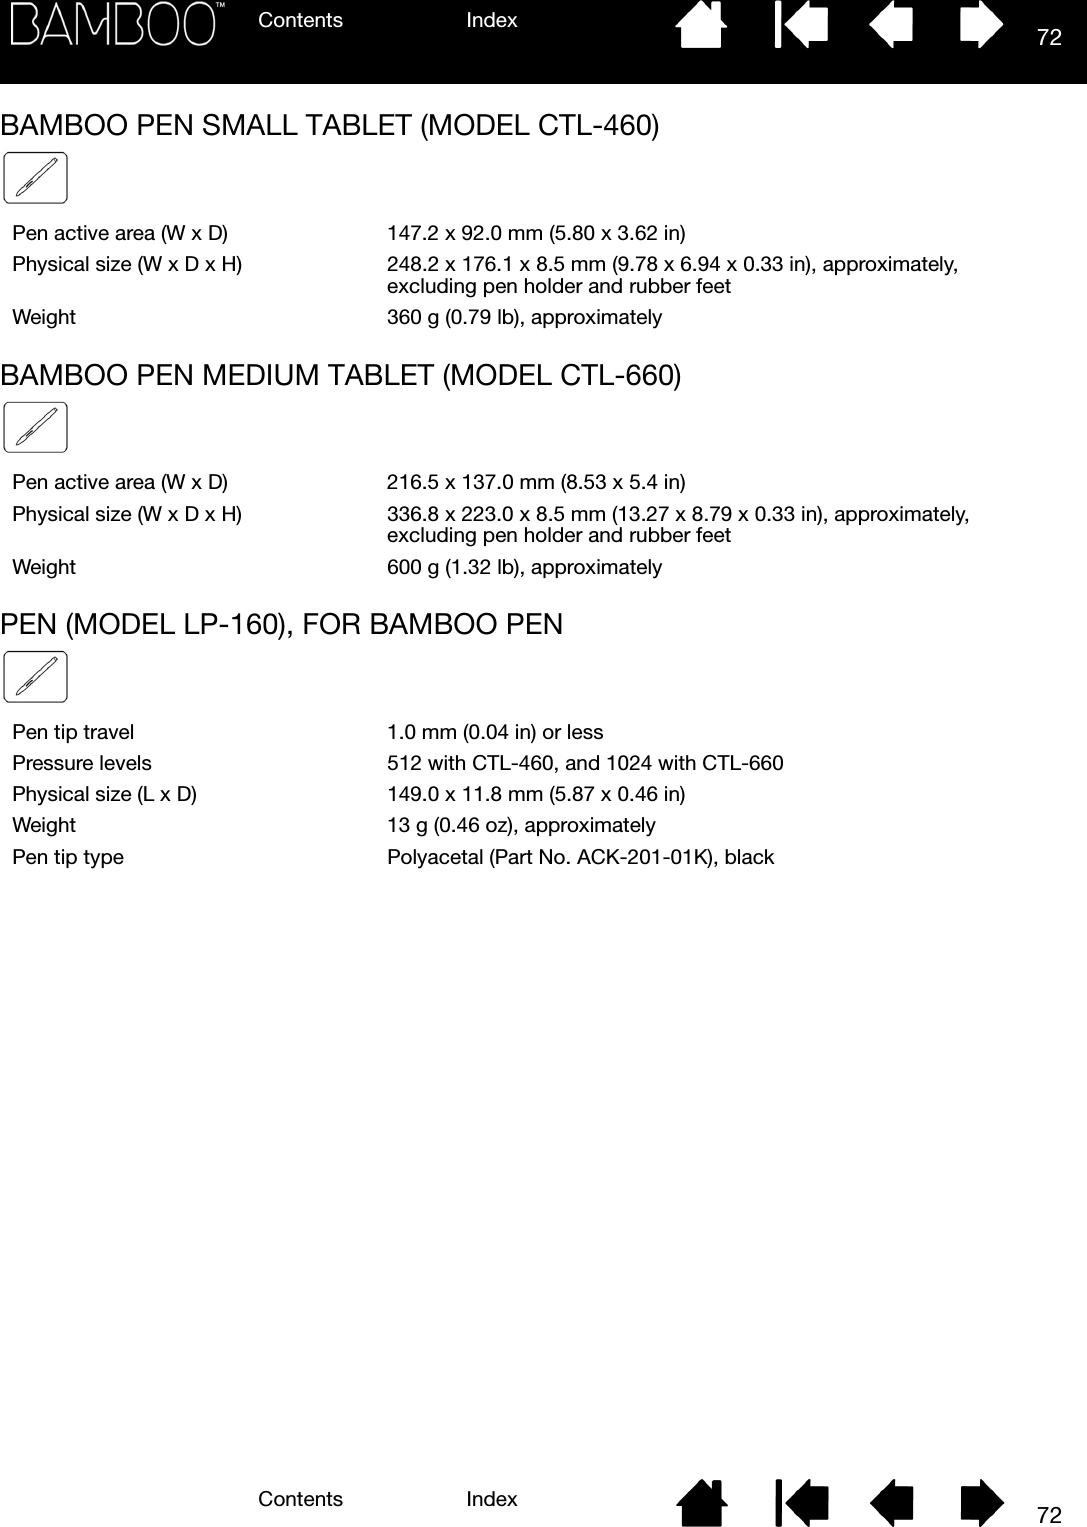 Contents IndexContents 72Index72BAMBOO PEN SMALL TABLET (MODEL CTL-460)BAMBOO PEN MEDIUM TABLET (MODEL CTL-660)PEN (MODEL LP-160), FOR BAMBOO PENPen active area (W x D) 147.2 x 92.0 mm (5.80 x 3.62 in)Physical size (W x D x H) 248.2 x 176.1 x 8.5 mm (9.78 x 6.94 x 0.33 in), approximately, excluding pen holder and rubber feetWeight 360 g (0.79 lb), approximatelyPen active area (W x D) 216.5 x 137.0 mm (8.53 x 5.4 in)Physical size (W x D x H) 336.8 x 223.0 x 8.5 mm (13.27 x 8.79 x 0.33 in), approximately, excluding pen holder and rubber feetWeight 600 g (1.32 lb), approximatelyPen tip travel 1.0 mm (0.04 in) or lessPressure levels 512 with CTL-460, and 1024 with CTL-660Physical size (L x D) 149.0 x 11.8 mm (5.87 x 0.46 in)Weight 13 g (0.46 oz), approximatelyPen tip type Polyacetal (Part No. ACK-201-01K), black